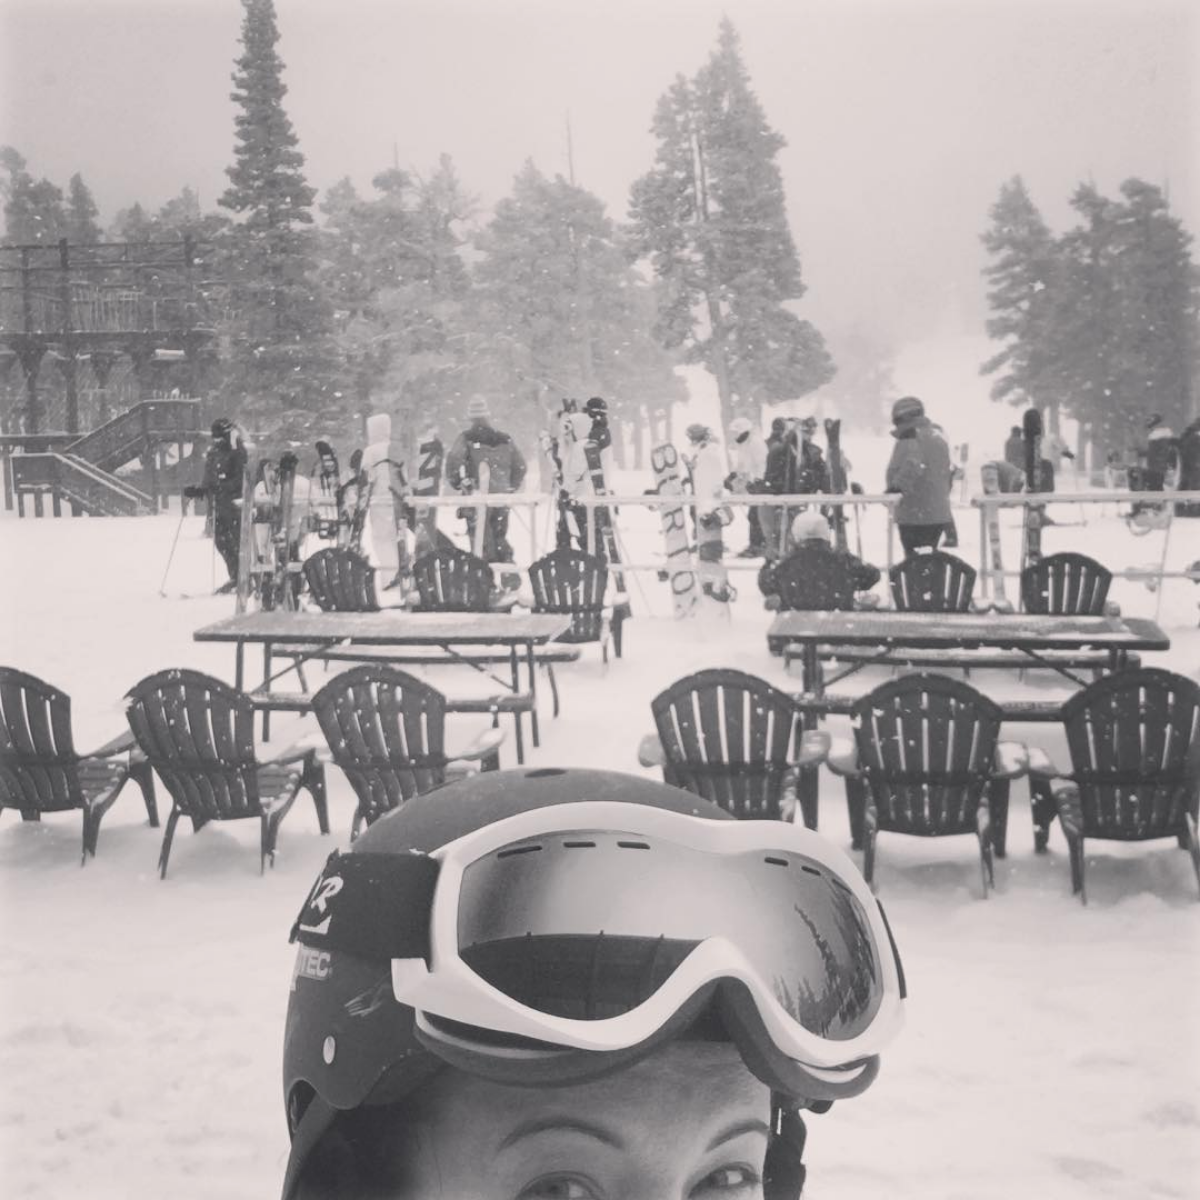 Photo of me in the snow in Tahoe